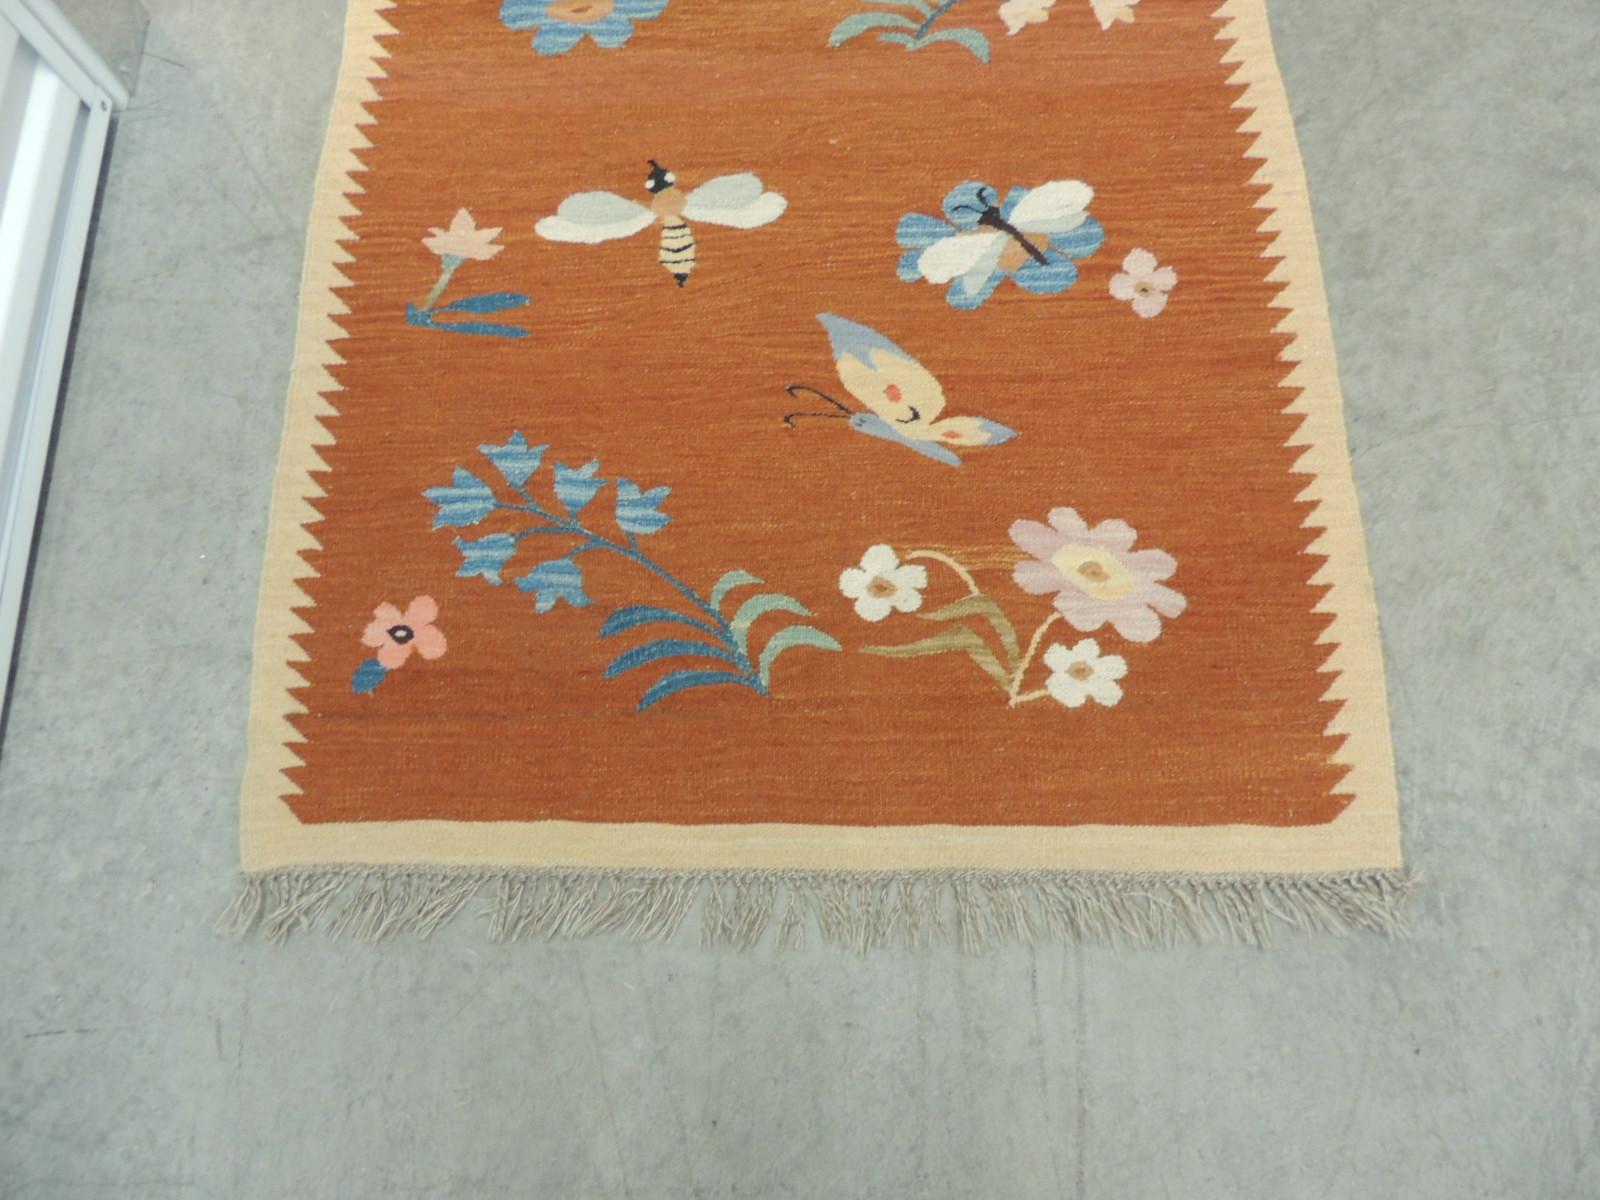 Vintage Swedish flat-weave floral runner with hand knotted fringes.
Rik Rak pattern border, rust color field depicting butterflies, bees, daisies, tulips, roses,
Jasmin, dragon flies, poppies.
In shades of rust, tan, blue, pink, mauve, red,